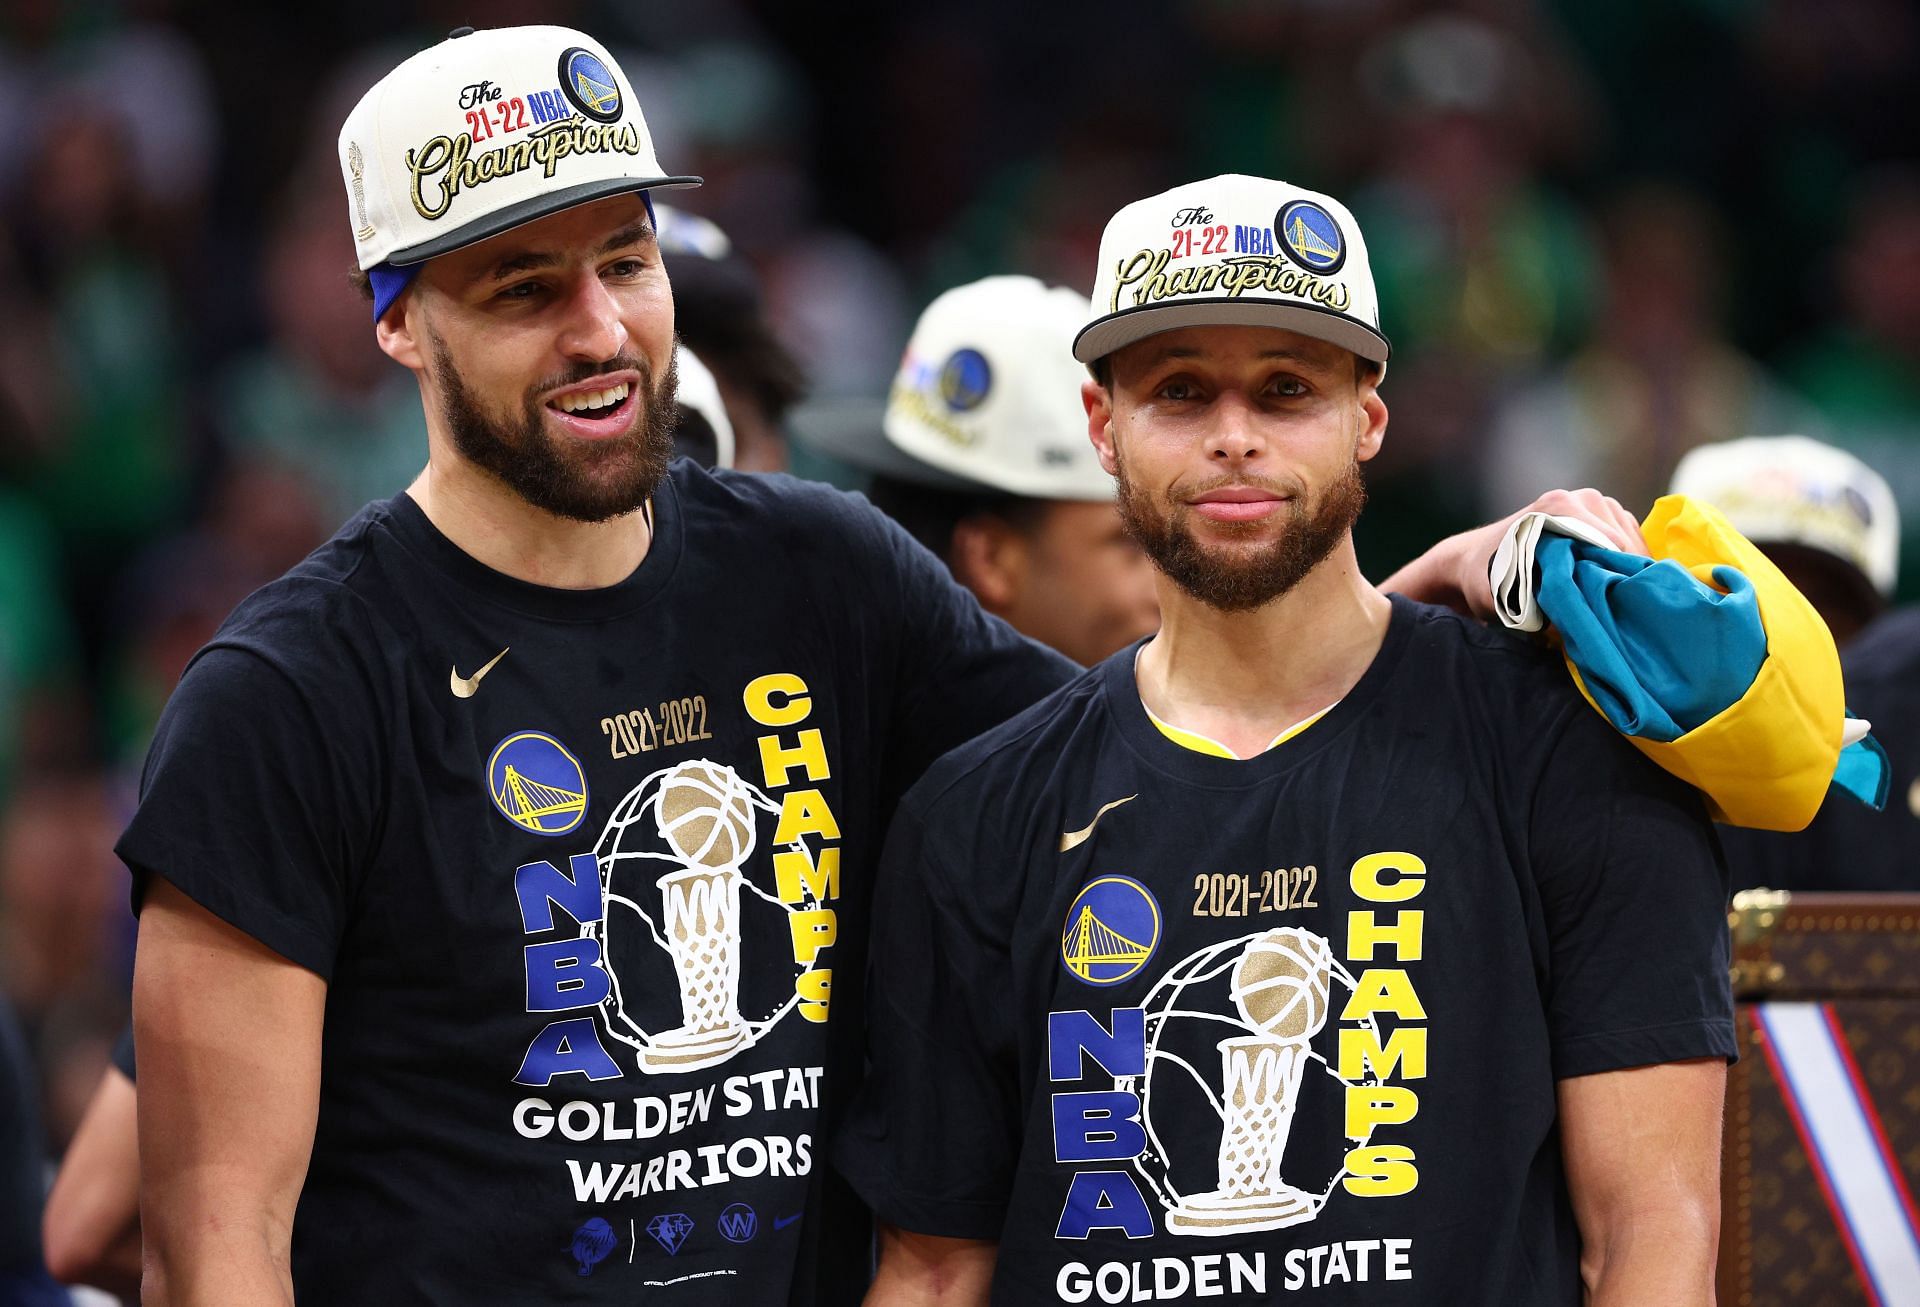 Klay Thompson (L) and Stephen Curry (R) after winning the 2022 NBA Finals (Image via Getty).